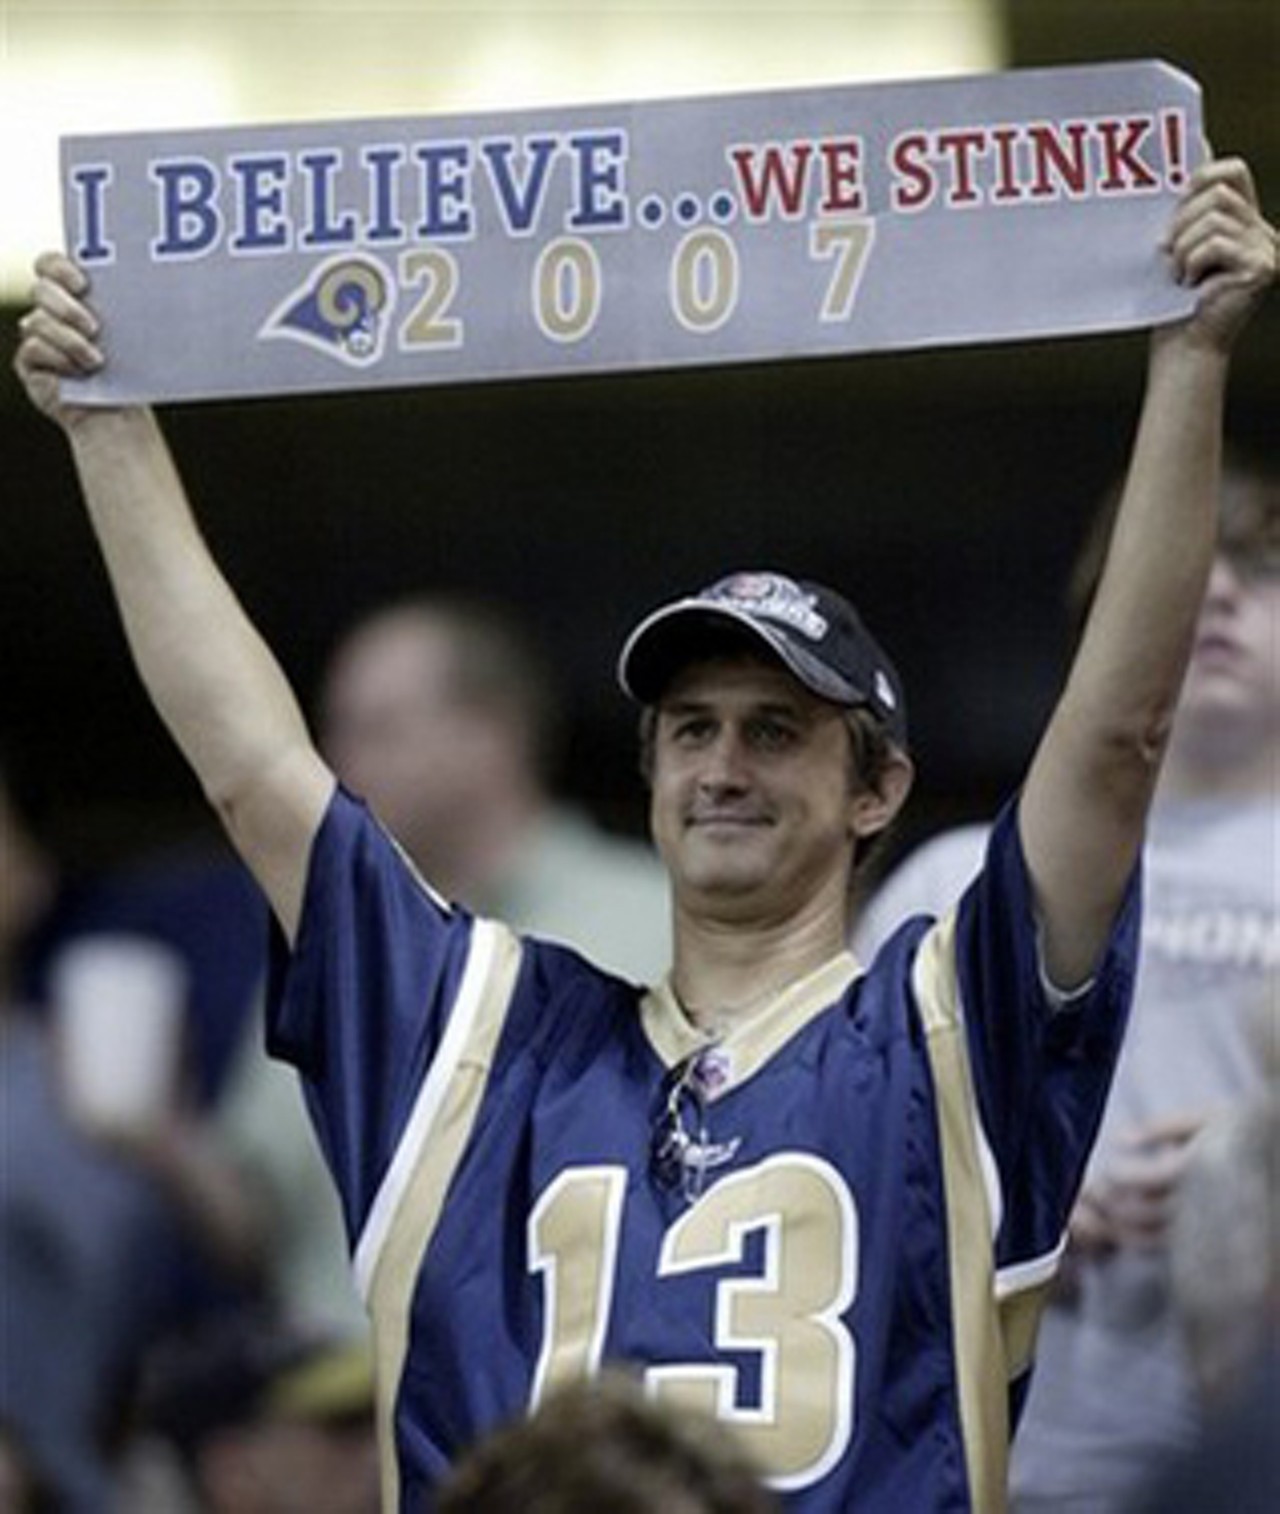 We Stink!
Any St. Louis Rams apparel. If you've already bought something, the receiver of your gift may also ask for a paper bag to wear over their head.